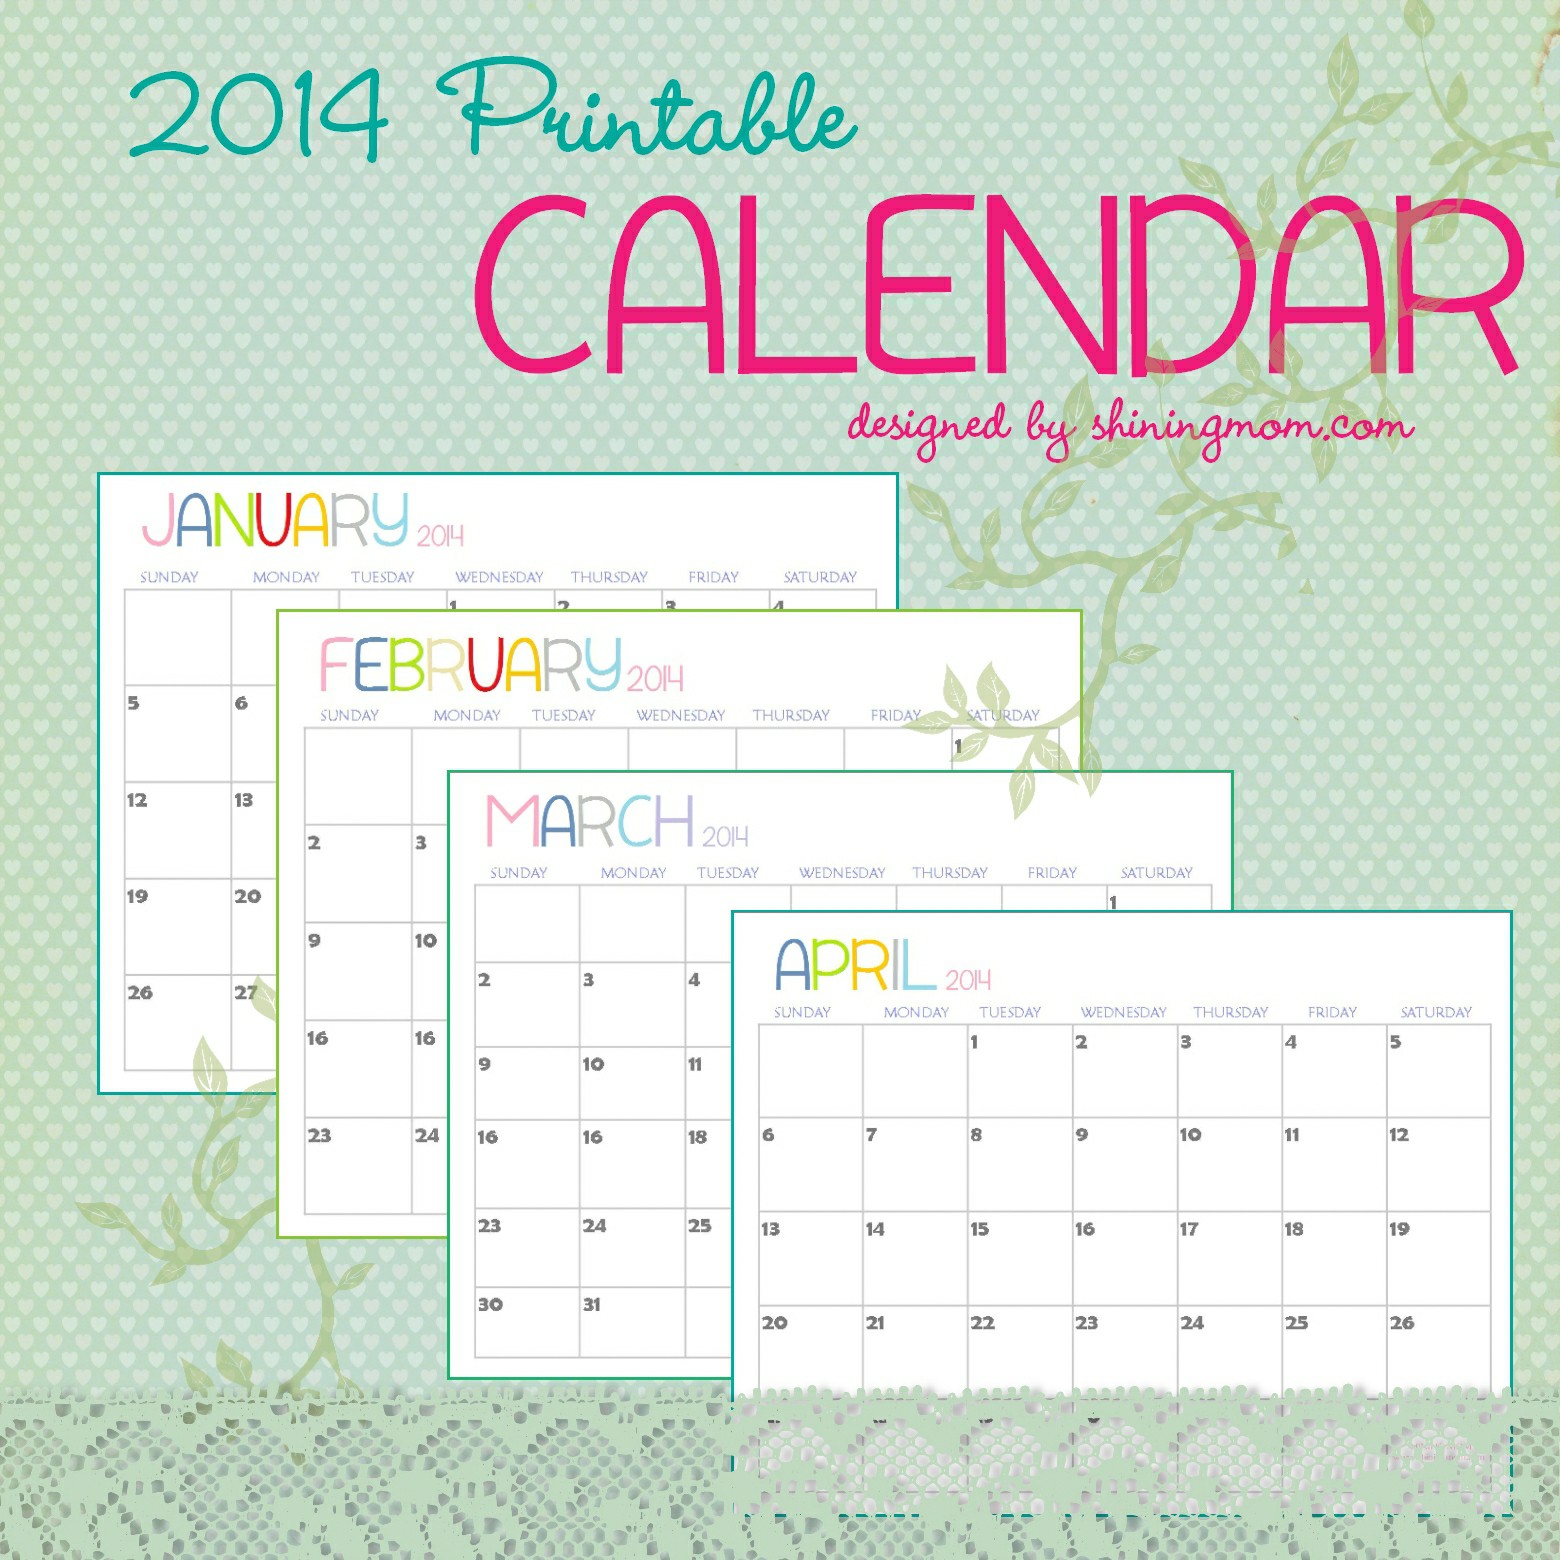 the free printable 2014 calendar by shining mom com is here